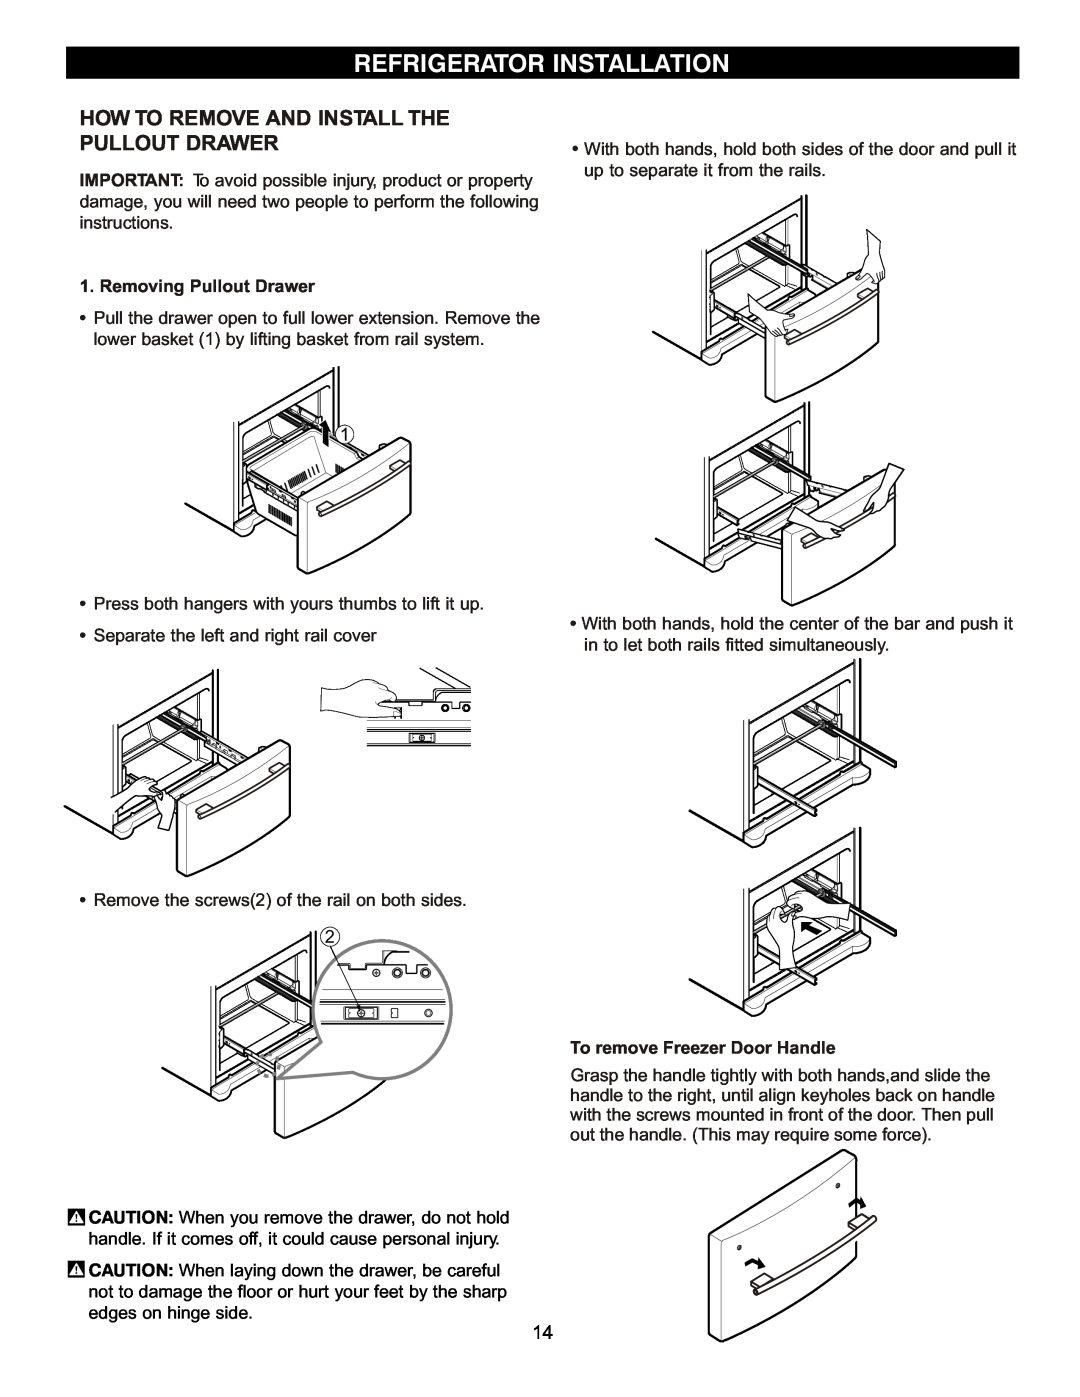 LG Electronics LFC22740 How To Remove And Install The Pullout Drawer, Removing Pullout Drawer, Refrigerator Installation 